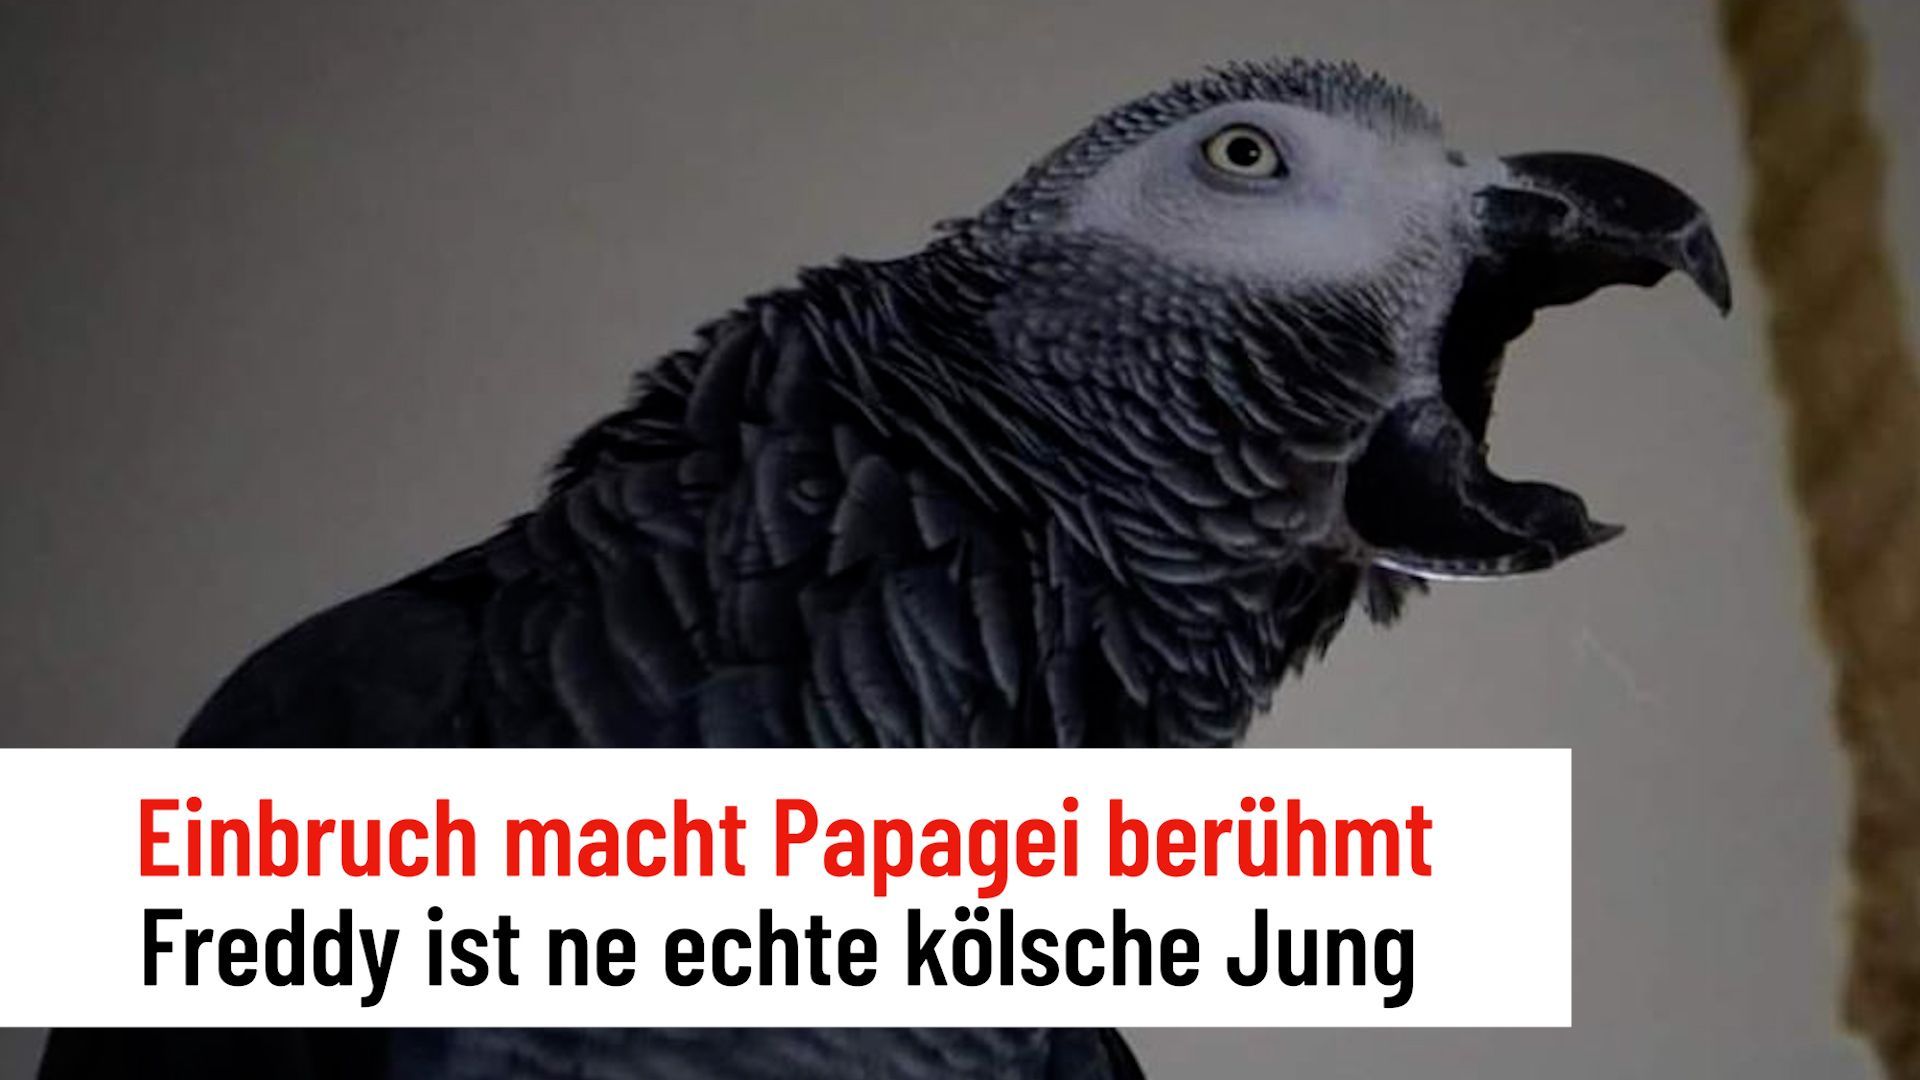 Break-in at Cologne DJ makes his parrot famous